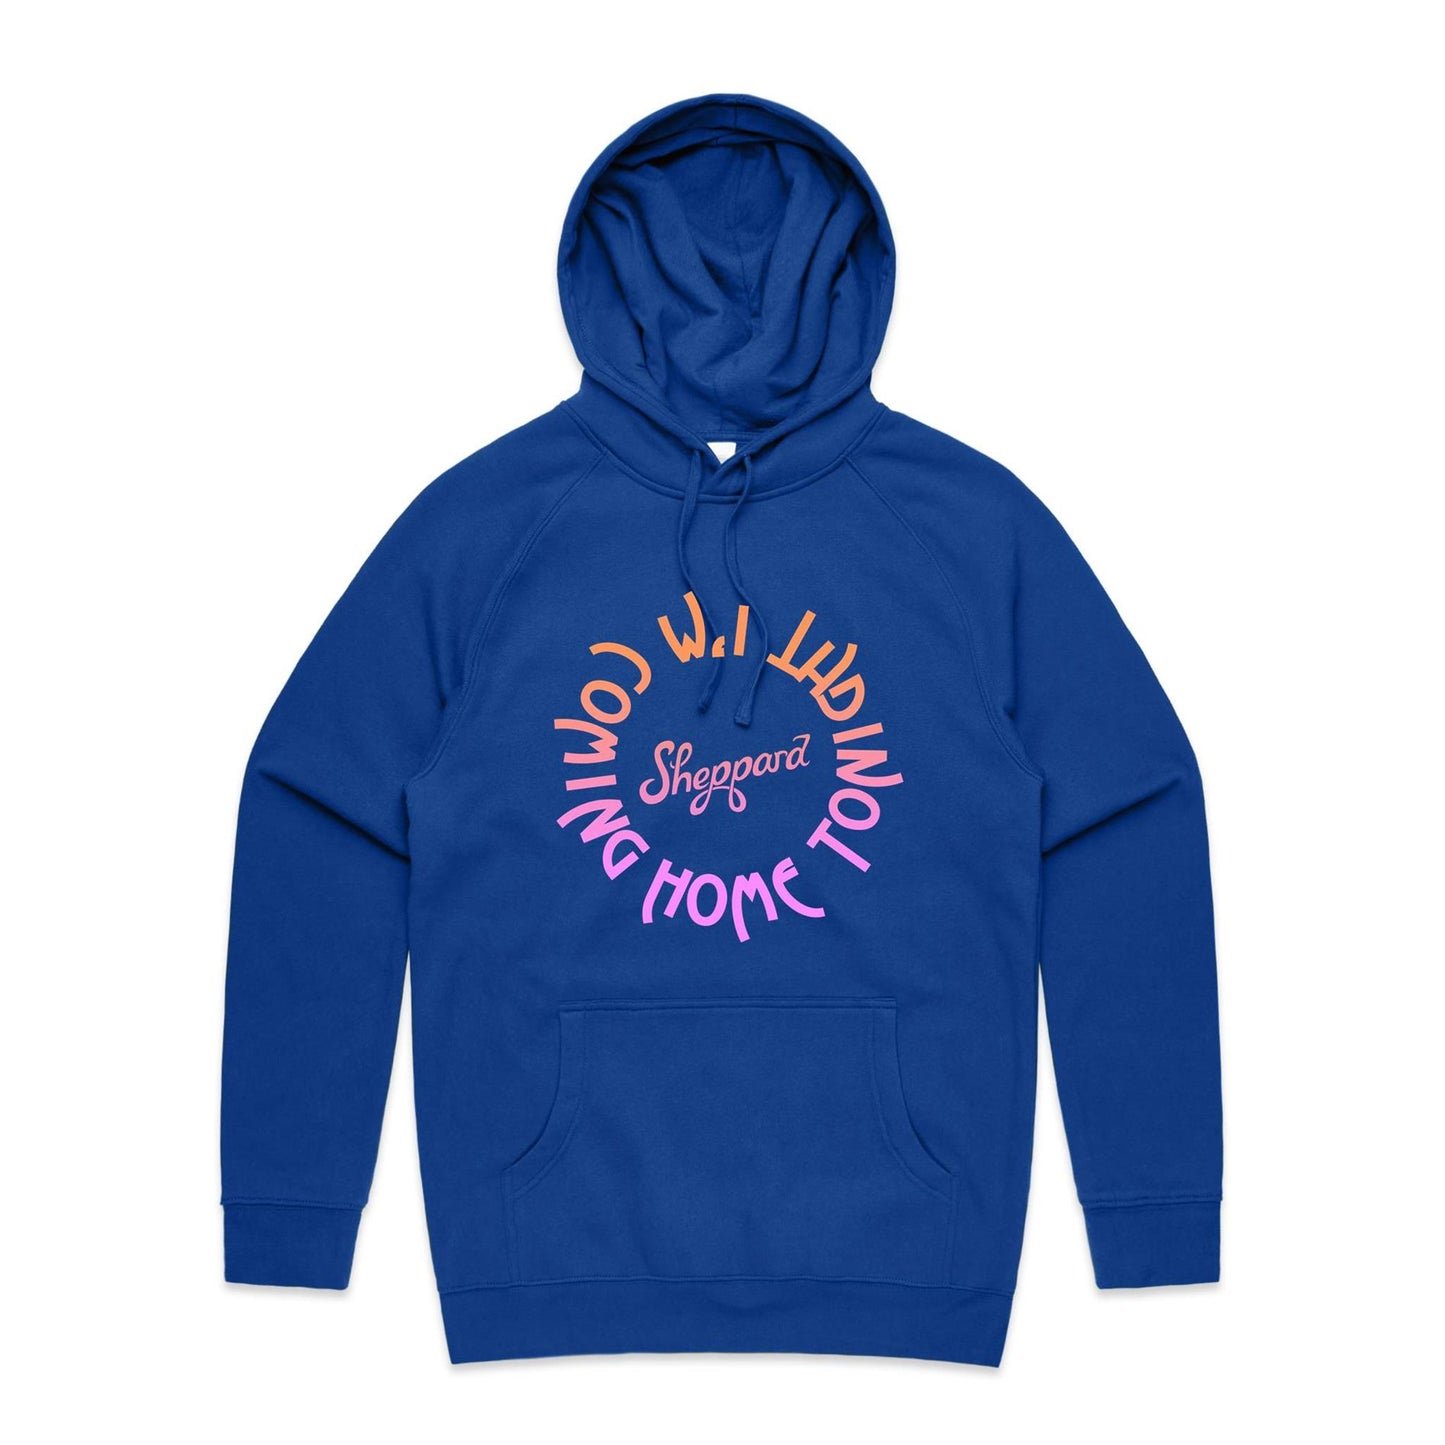 NEW! Coming Home - Hoodie